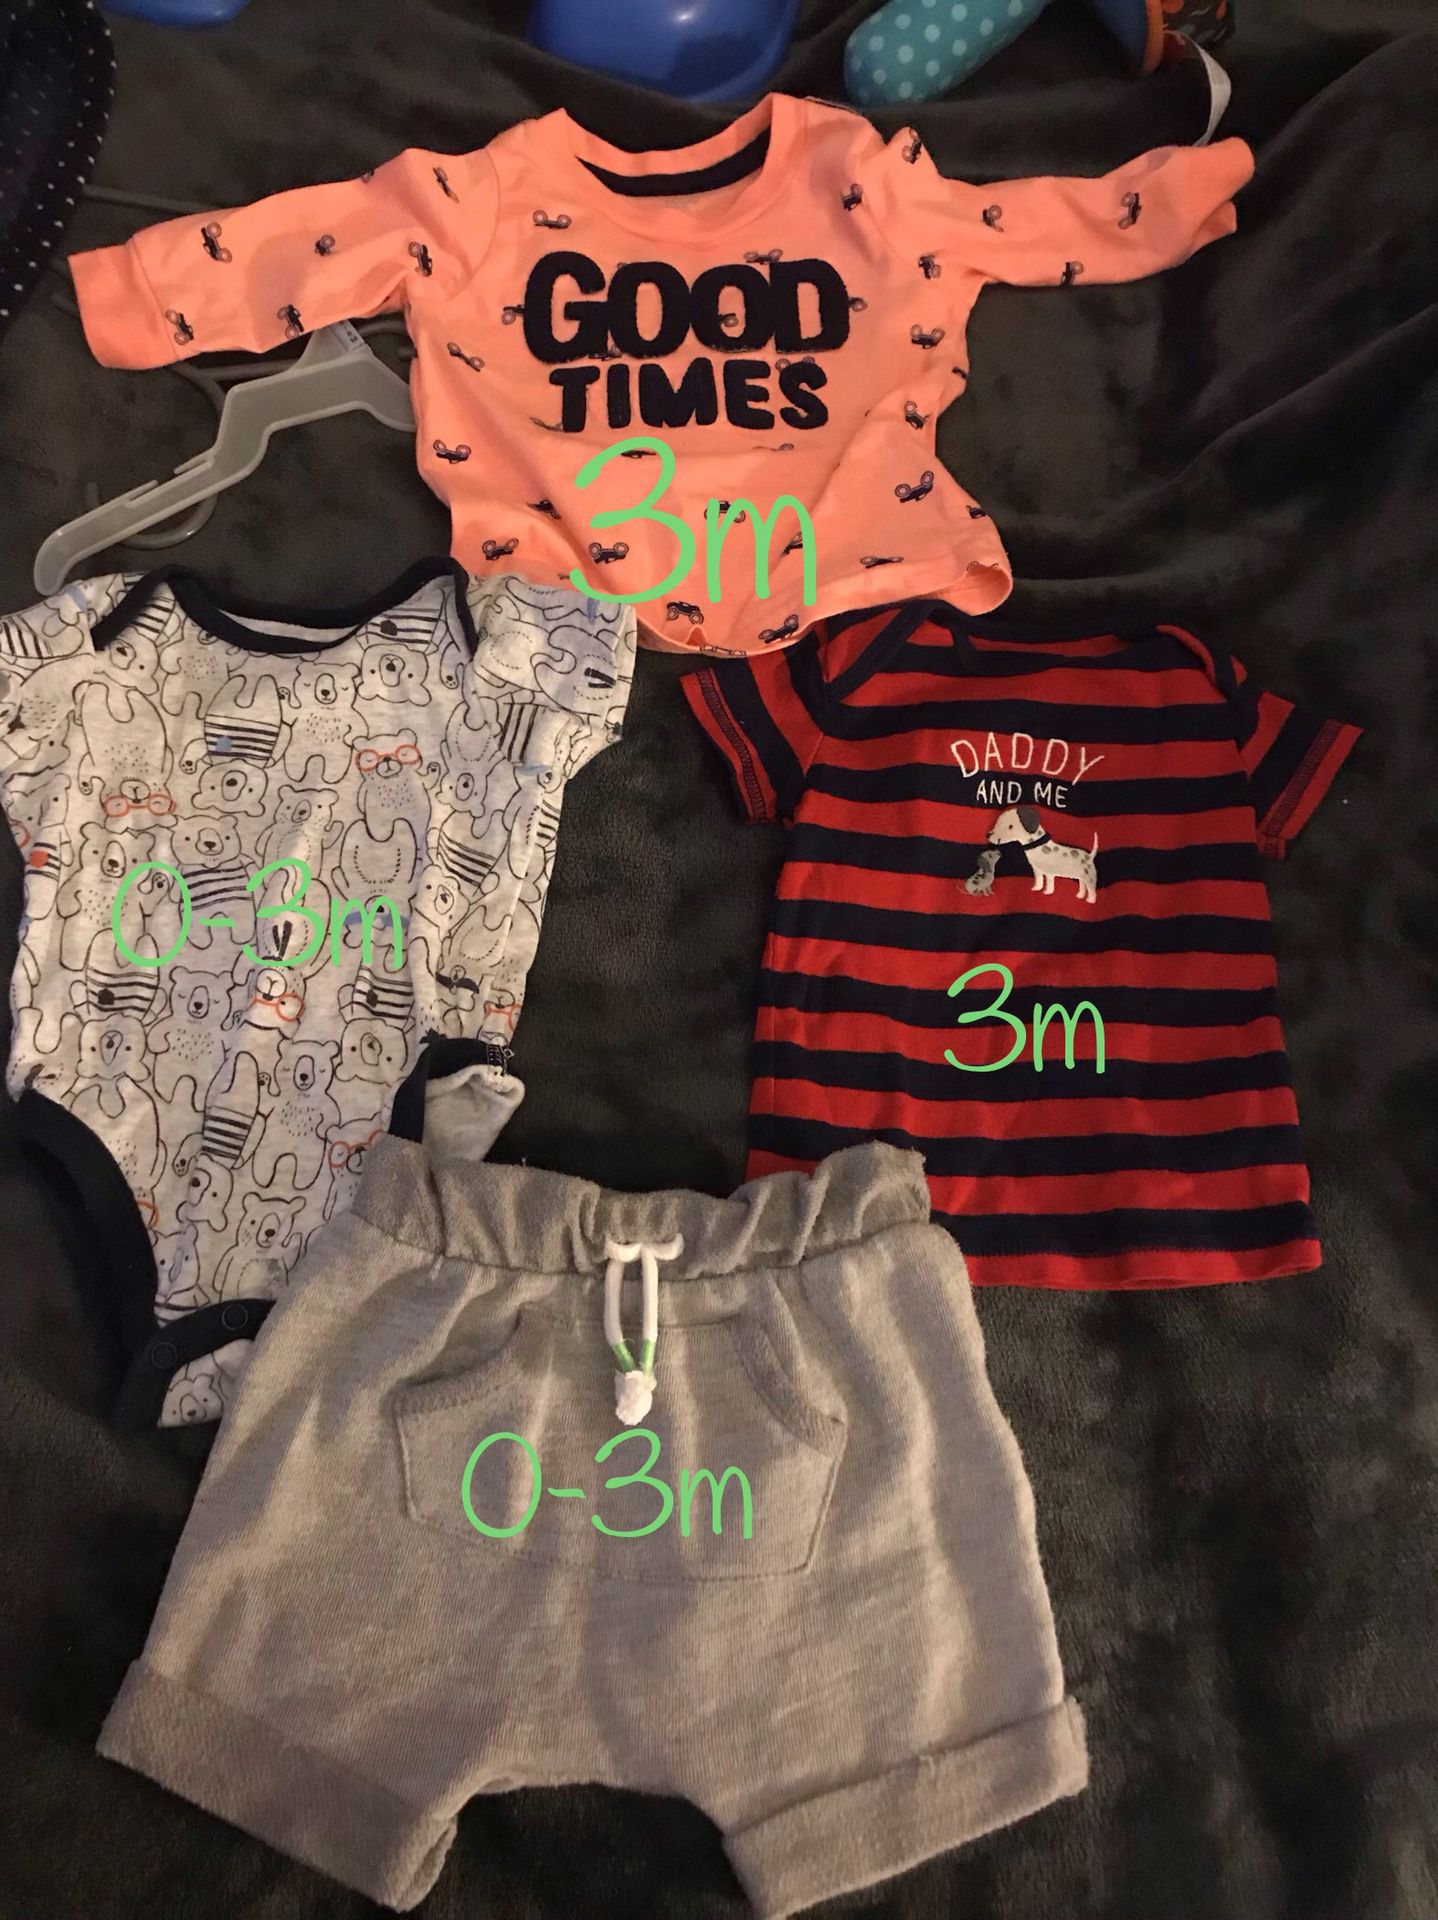 Baby clothes size 0-3 and 3m